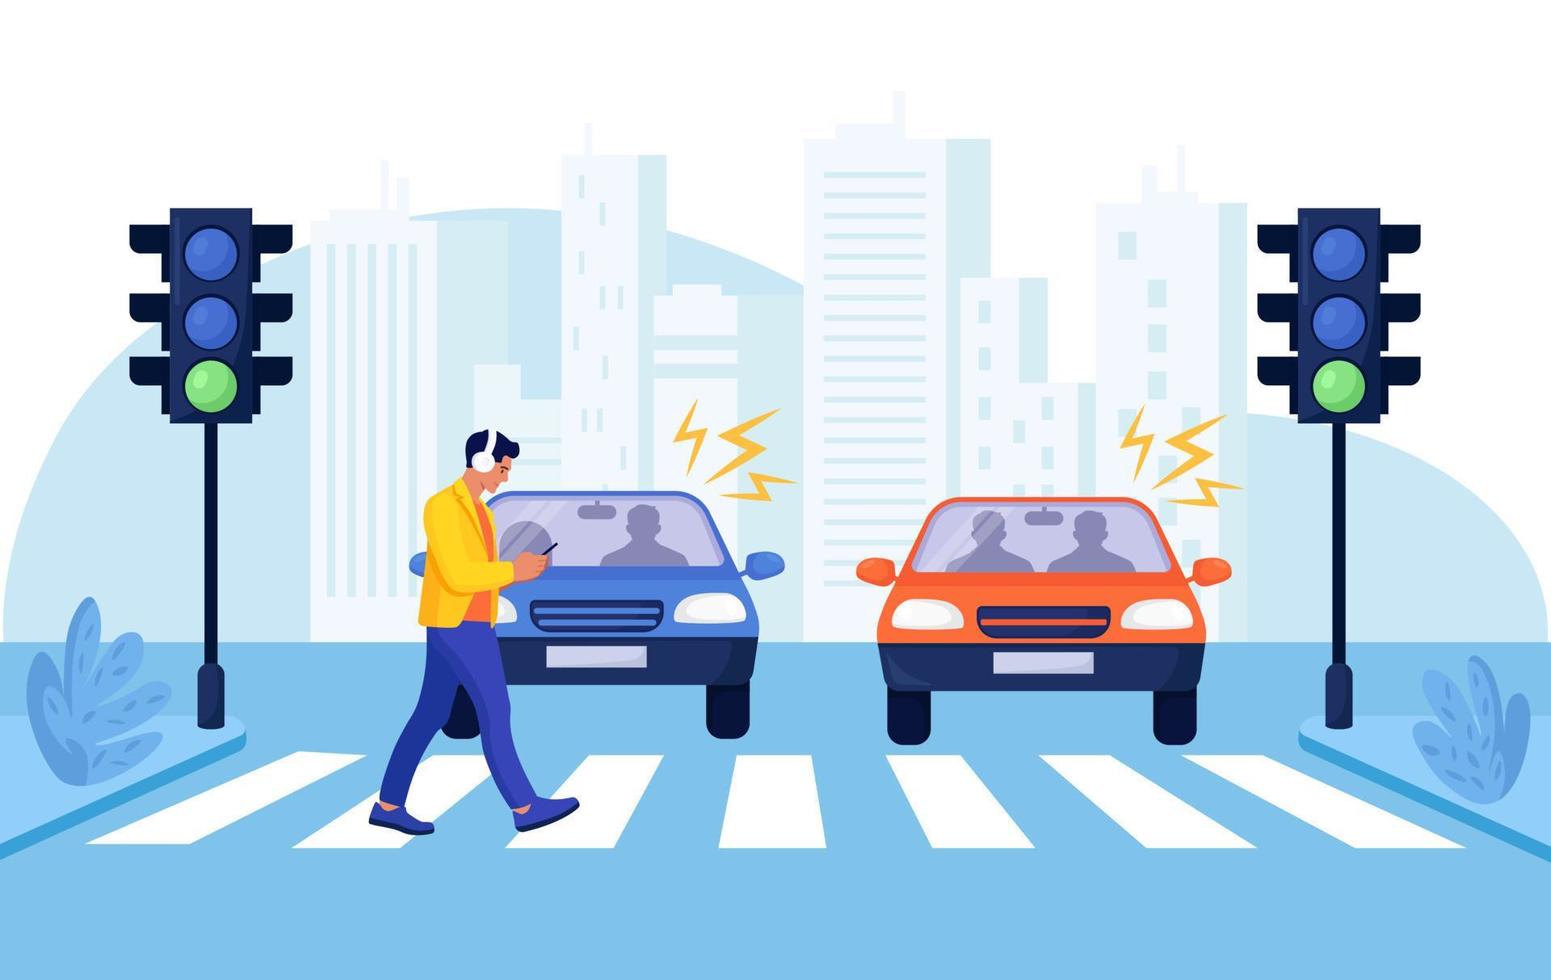 Crosswalk accident with pedestrian. Man with smartphone and headphones crossing road on red traffic lights. Road safety. Car vehicle accident danger, street traffic rules. Urban lifestyle vector